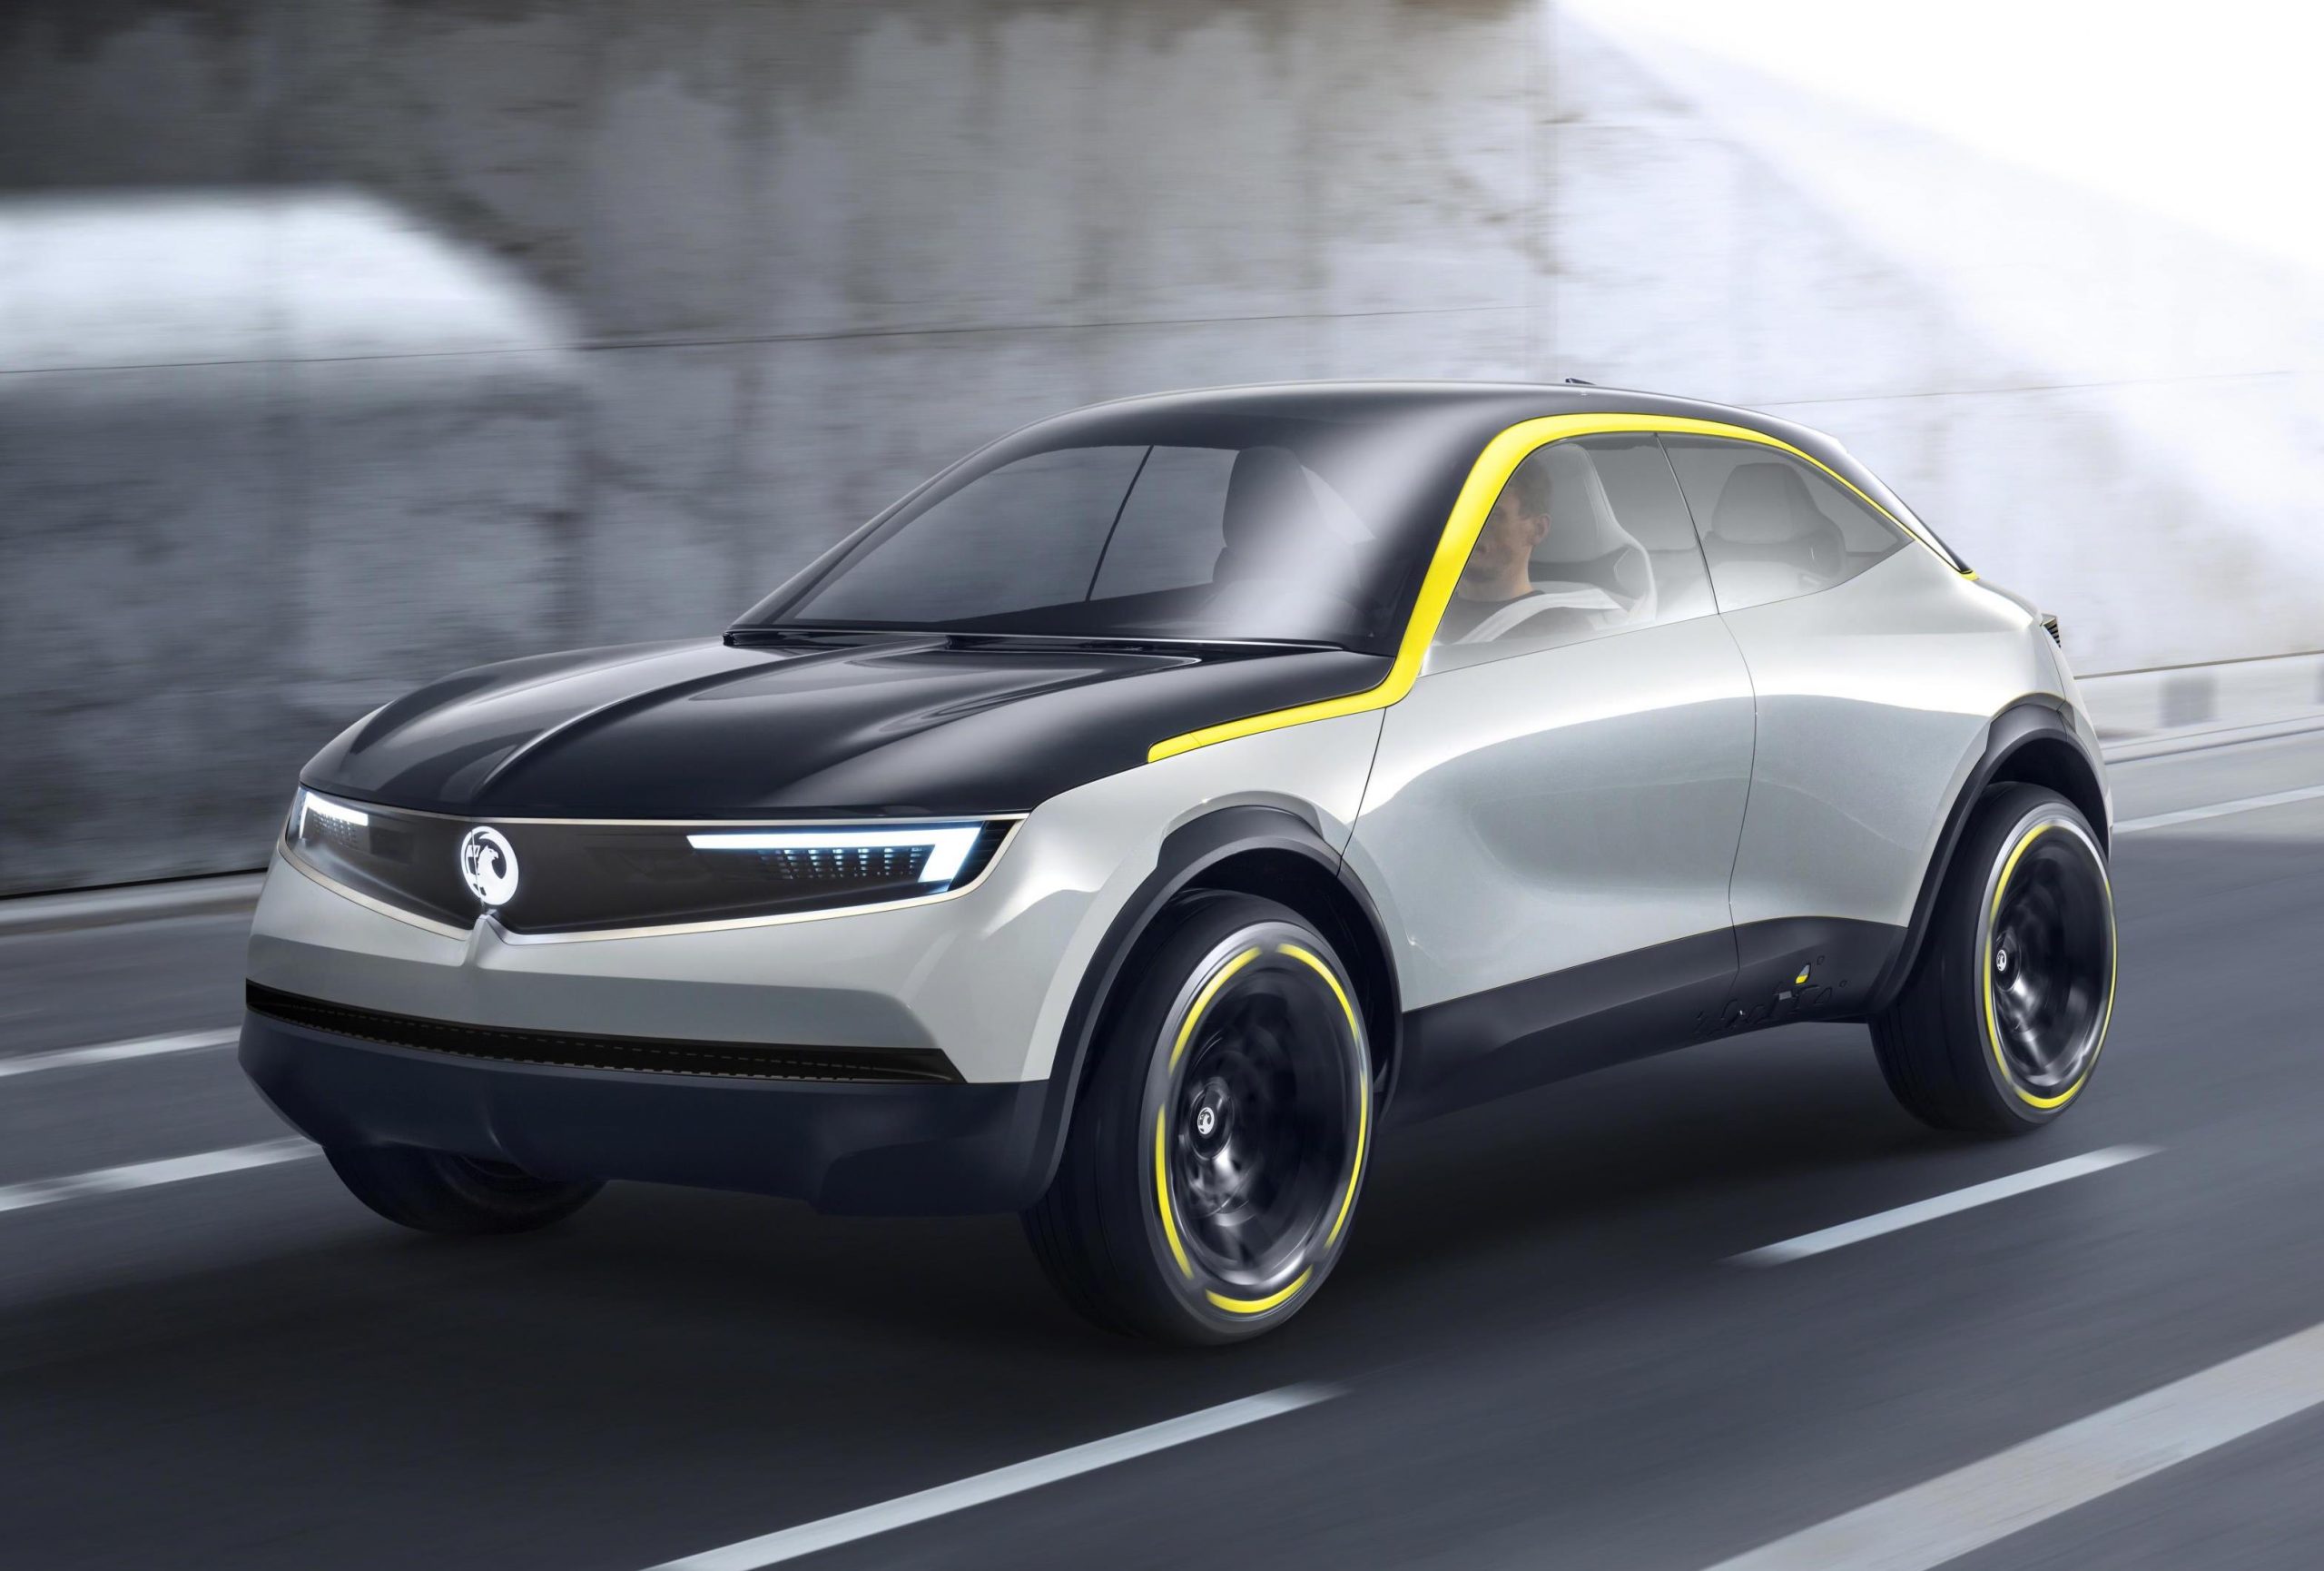 Vauxhall GT X Experimental concept previews upcoming design